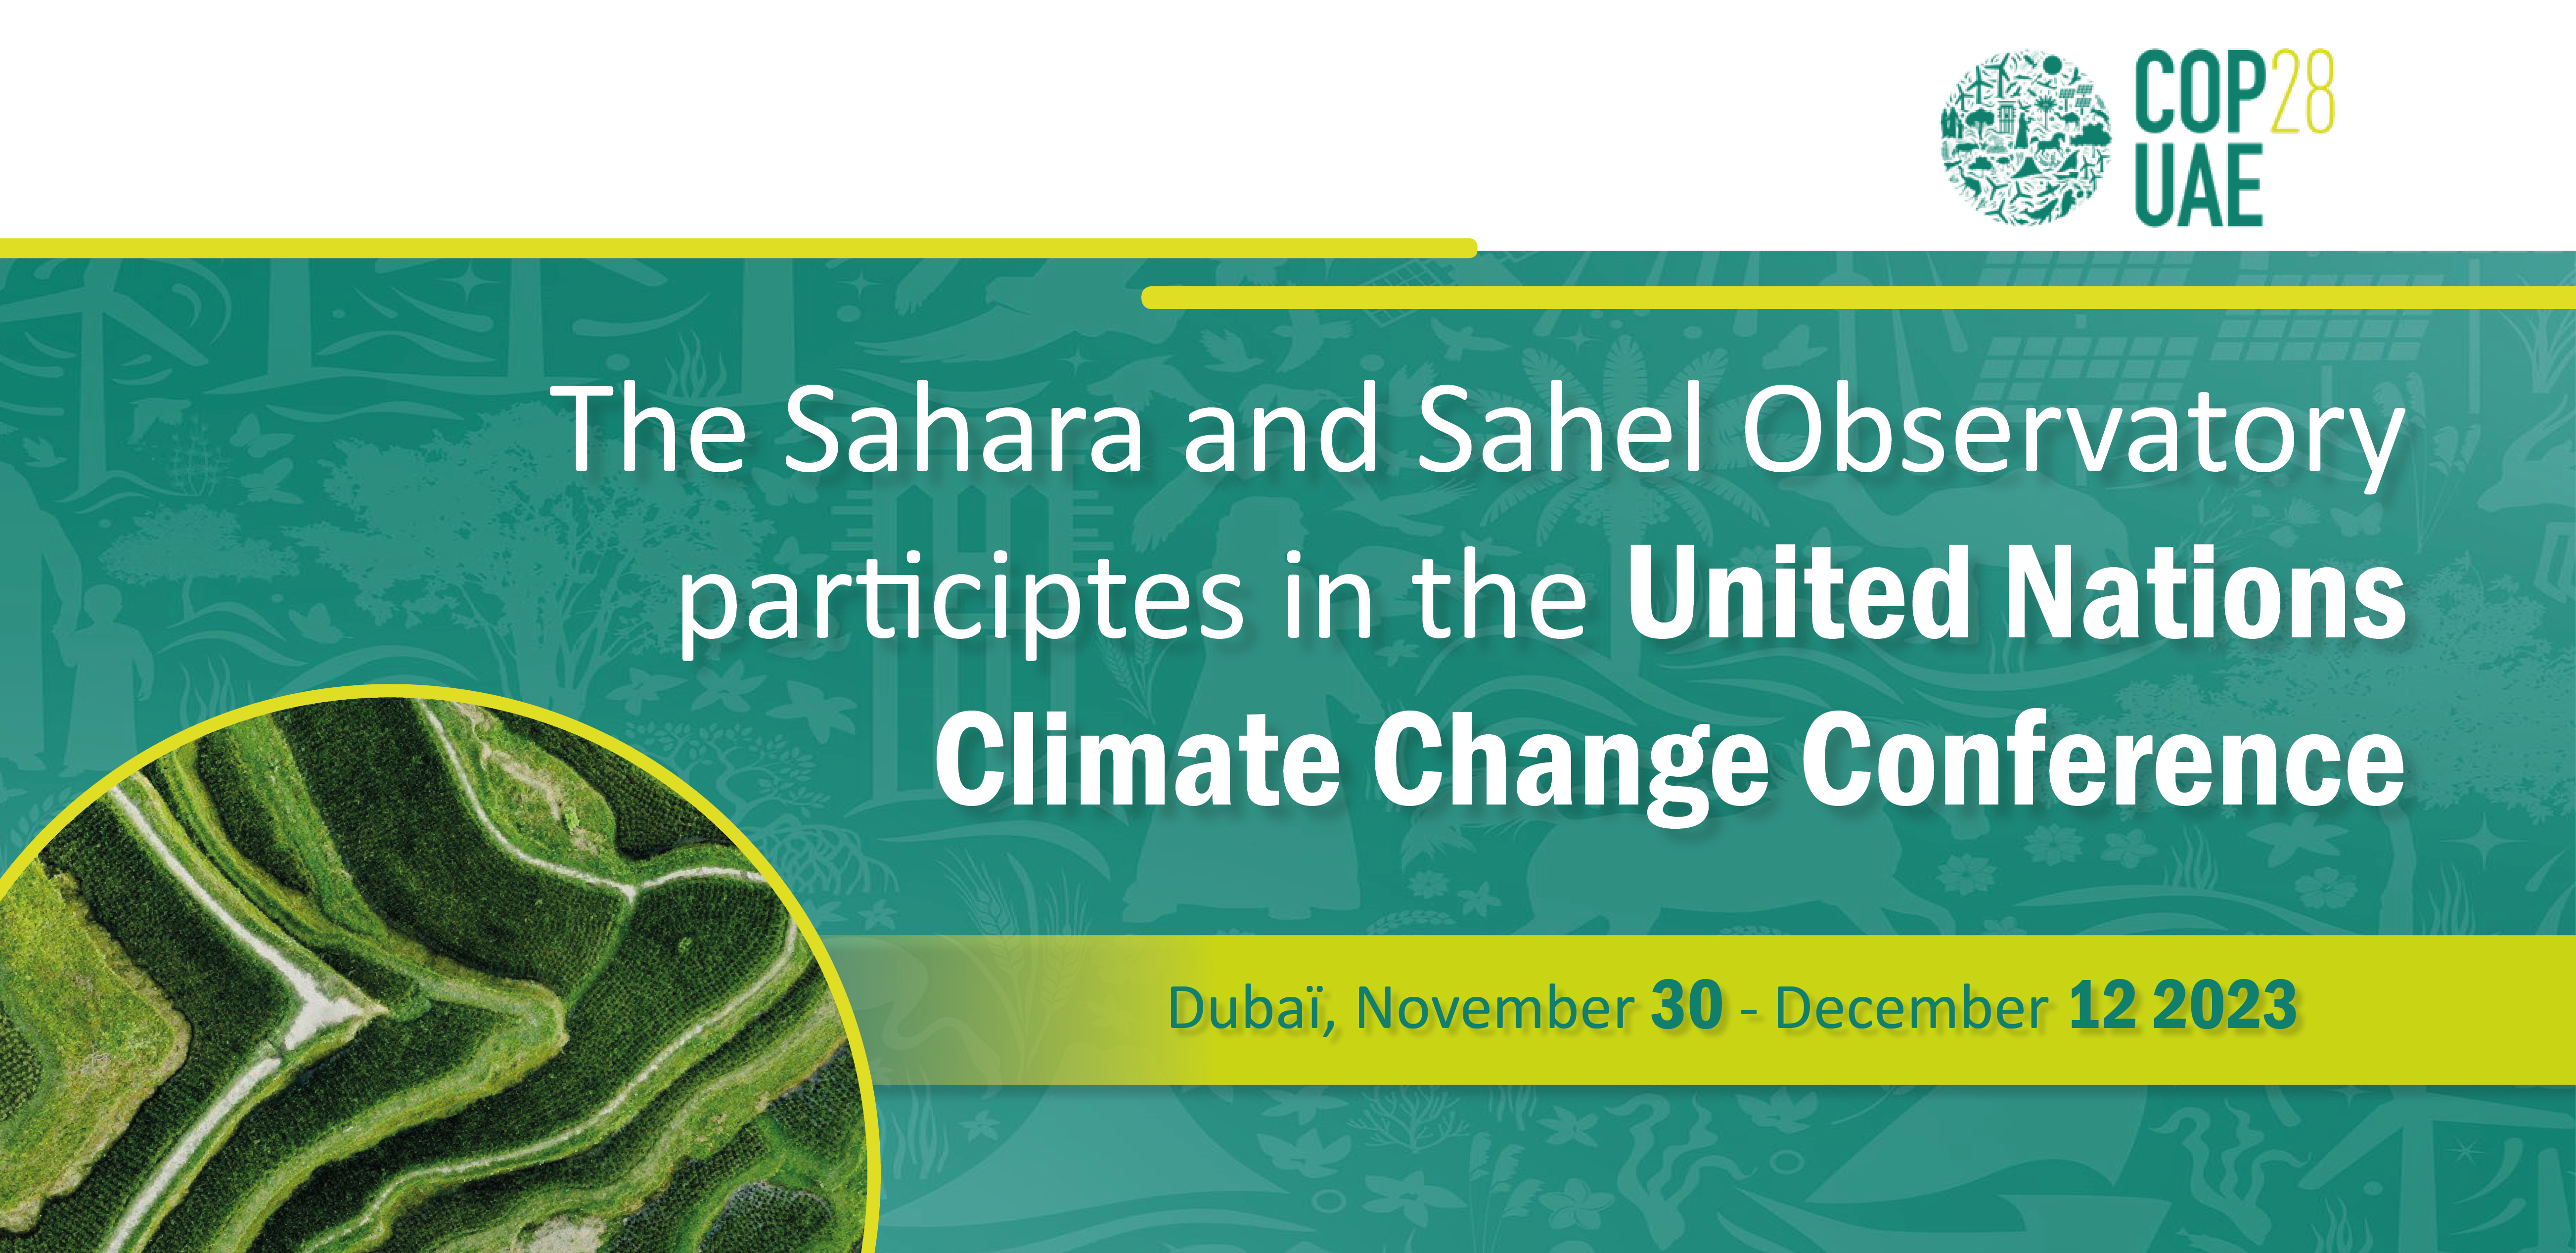  The Sahara and Sahel Observatory is taking part in the 28th Session of the UN Climate